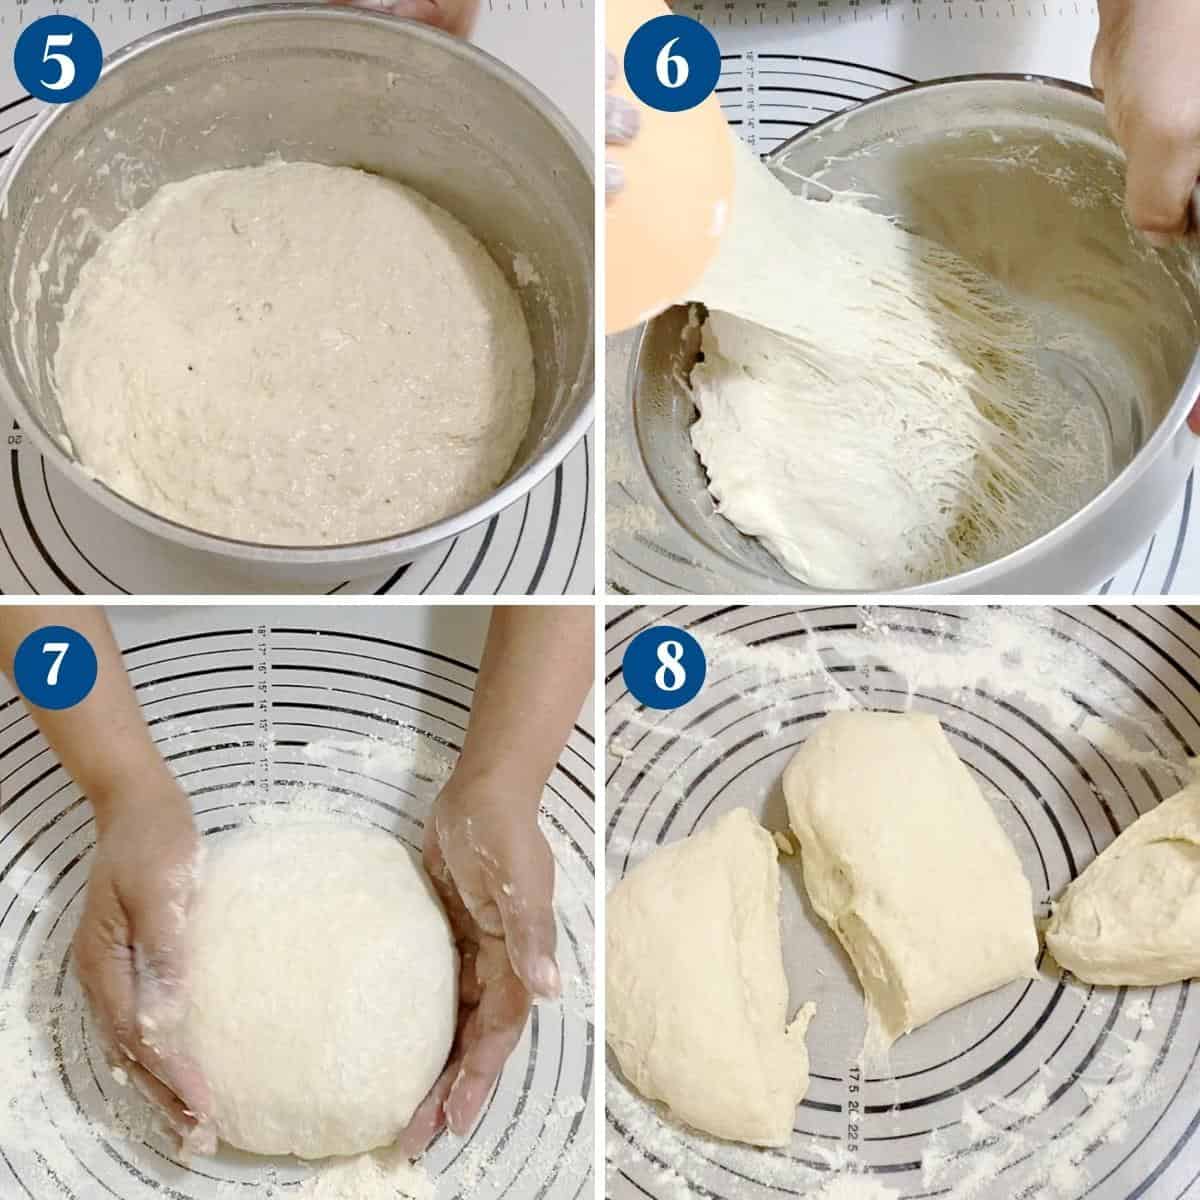 Progress pictures making the no knead pizza dough.